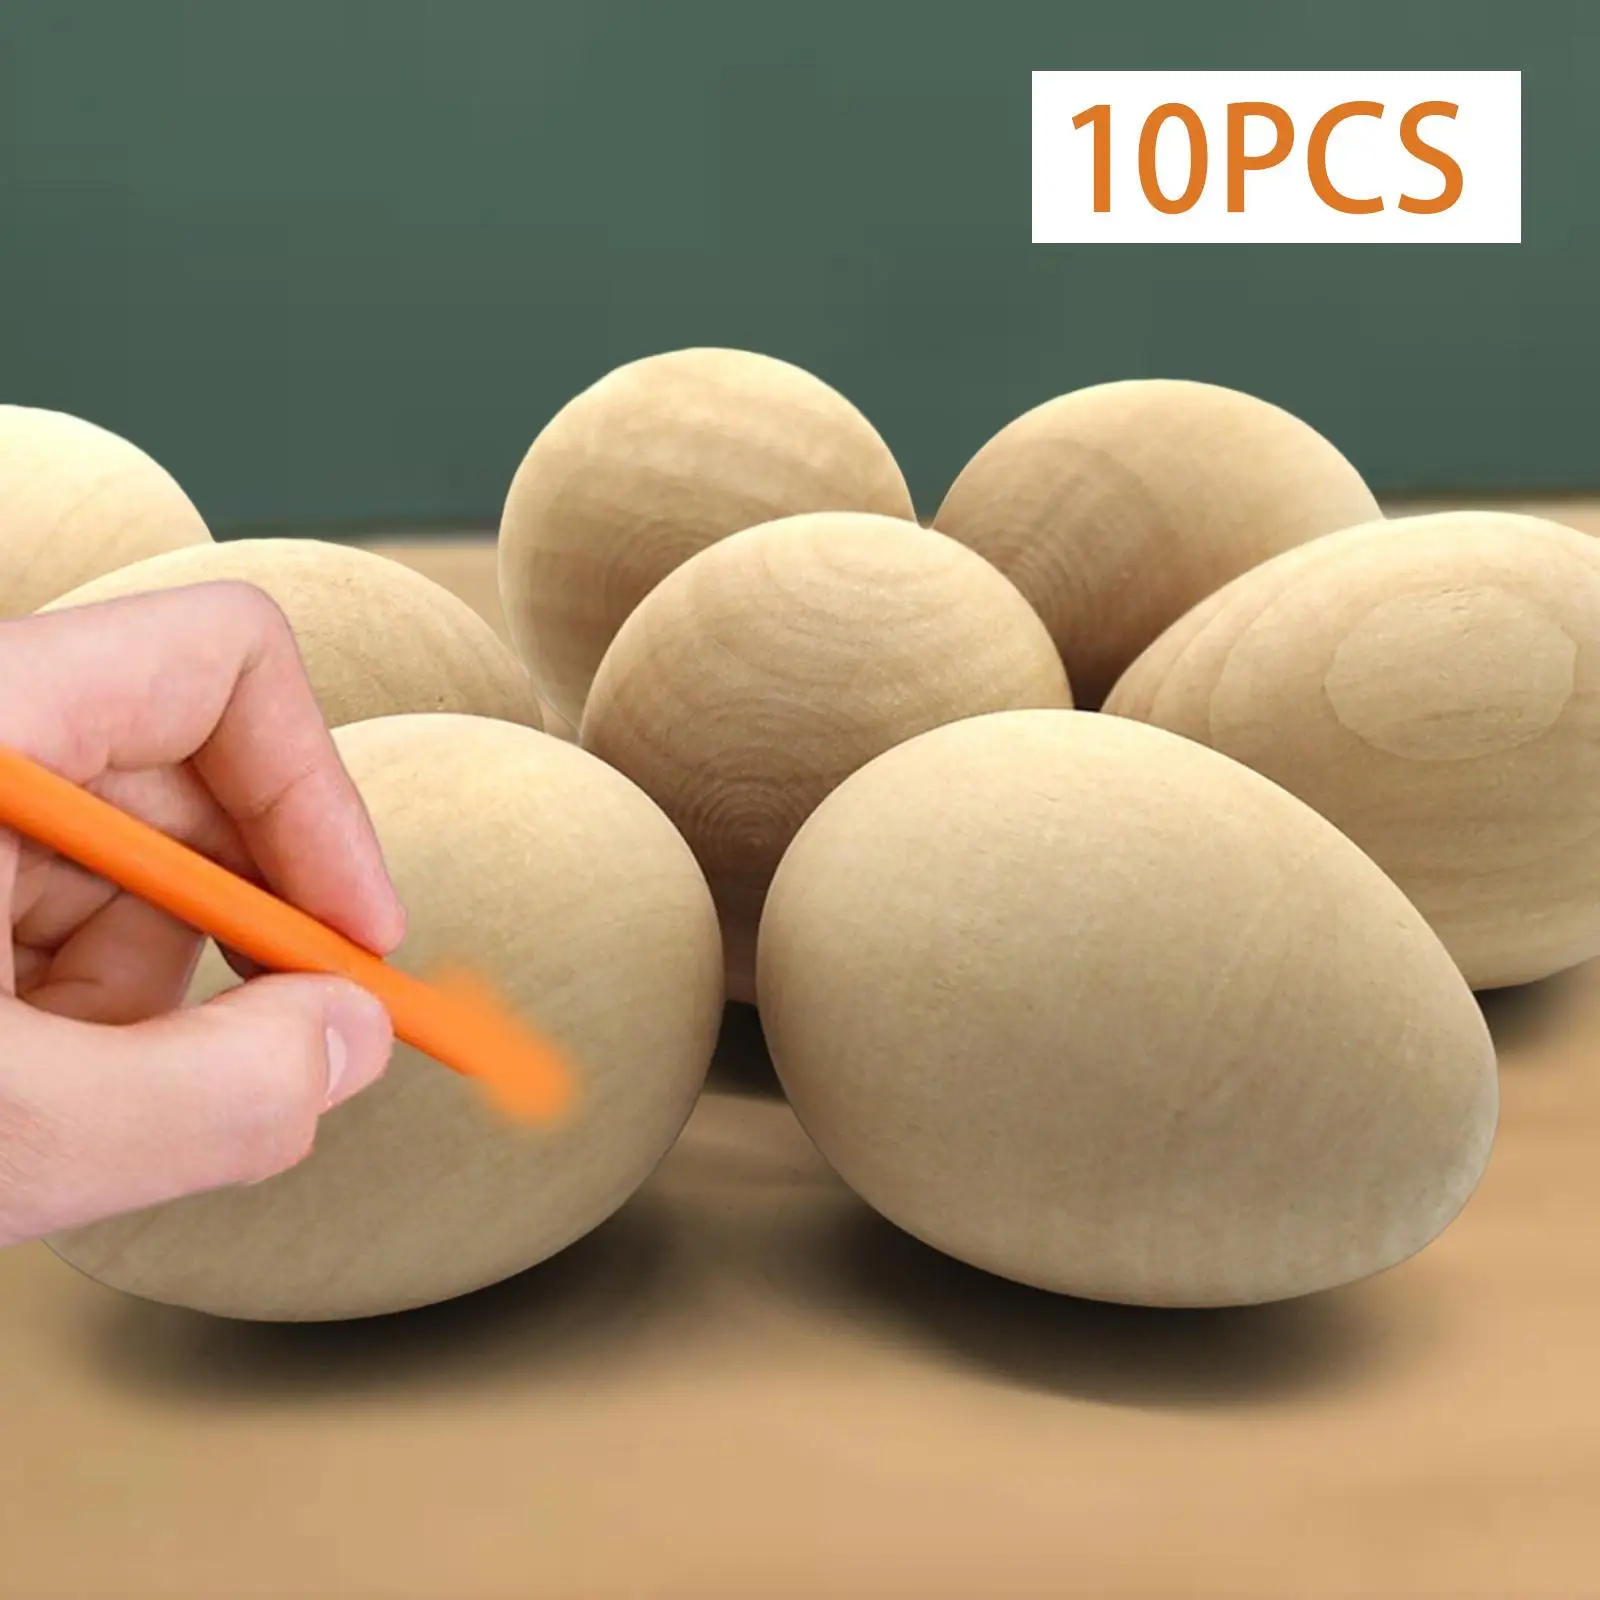 10x Wooden Blank Eggs Manual Graffiti Unfinished Wood Eggs with Flat Bottom for DIY Crafts